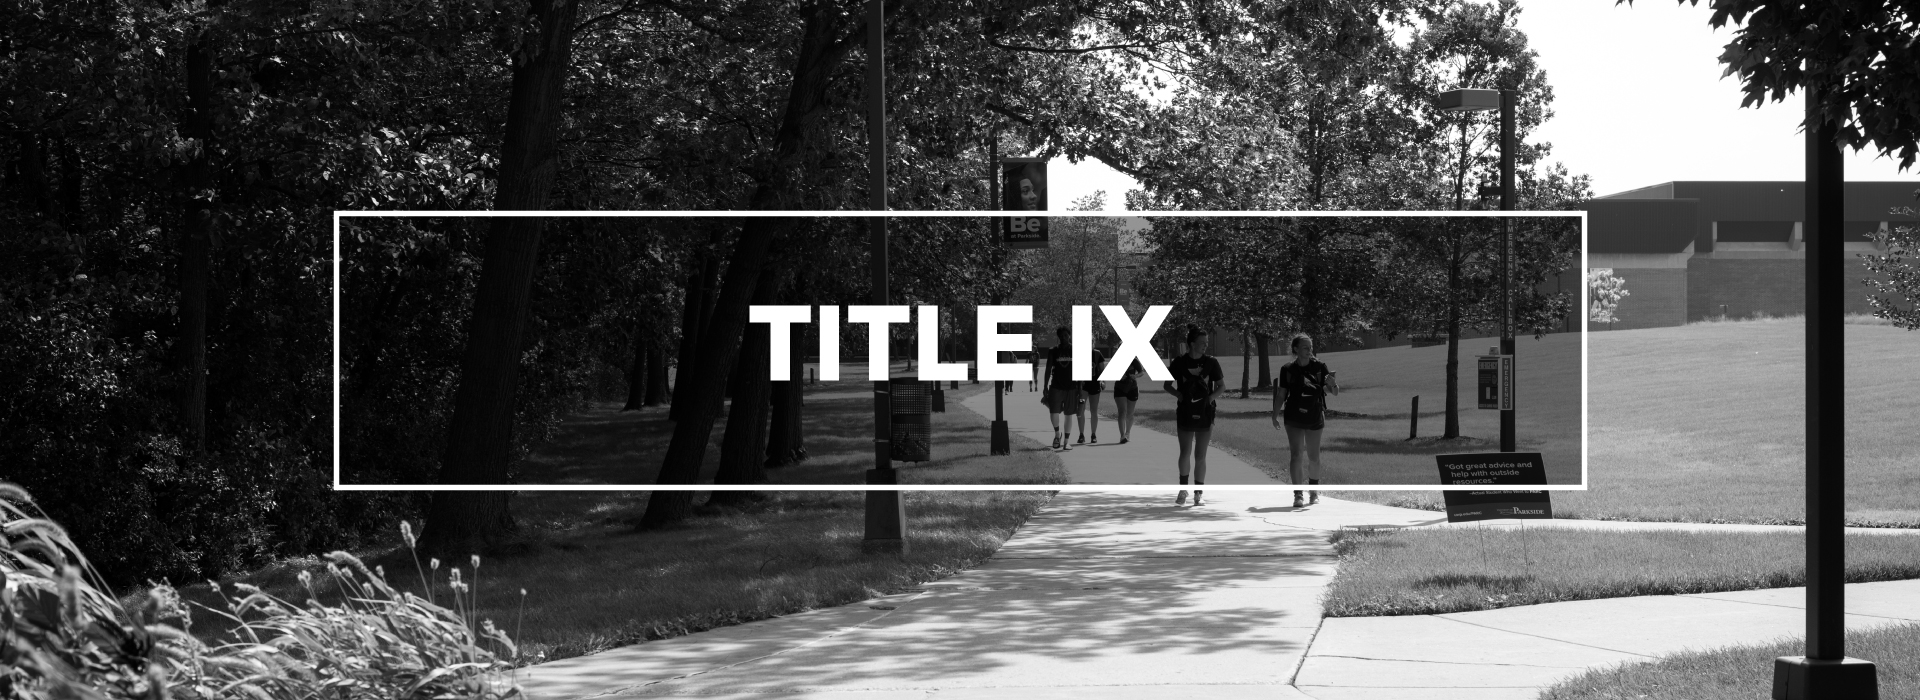 Title Ix Education Policy And Sexual Violence Uw Parkside 